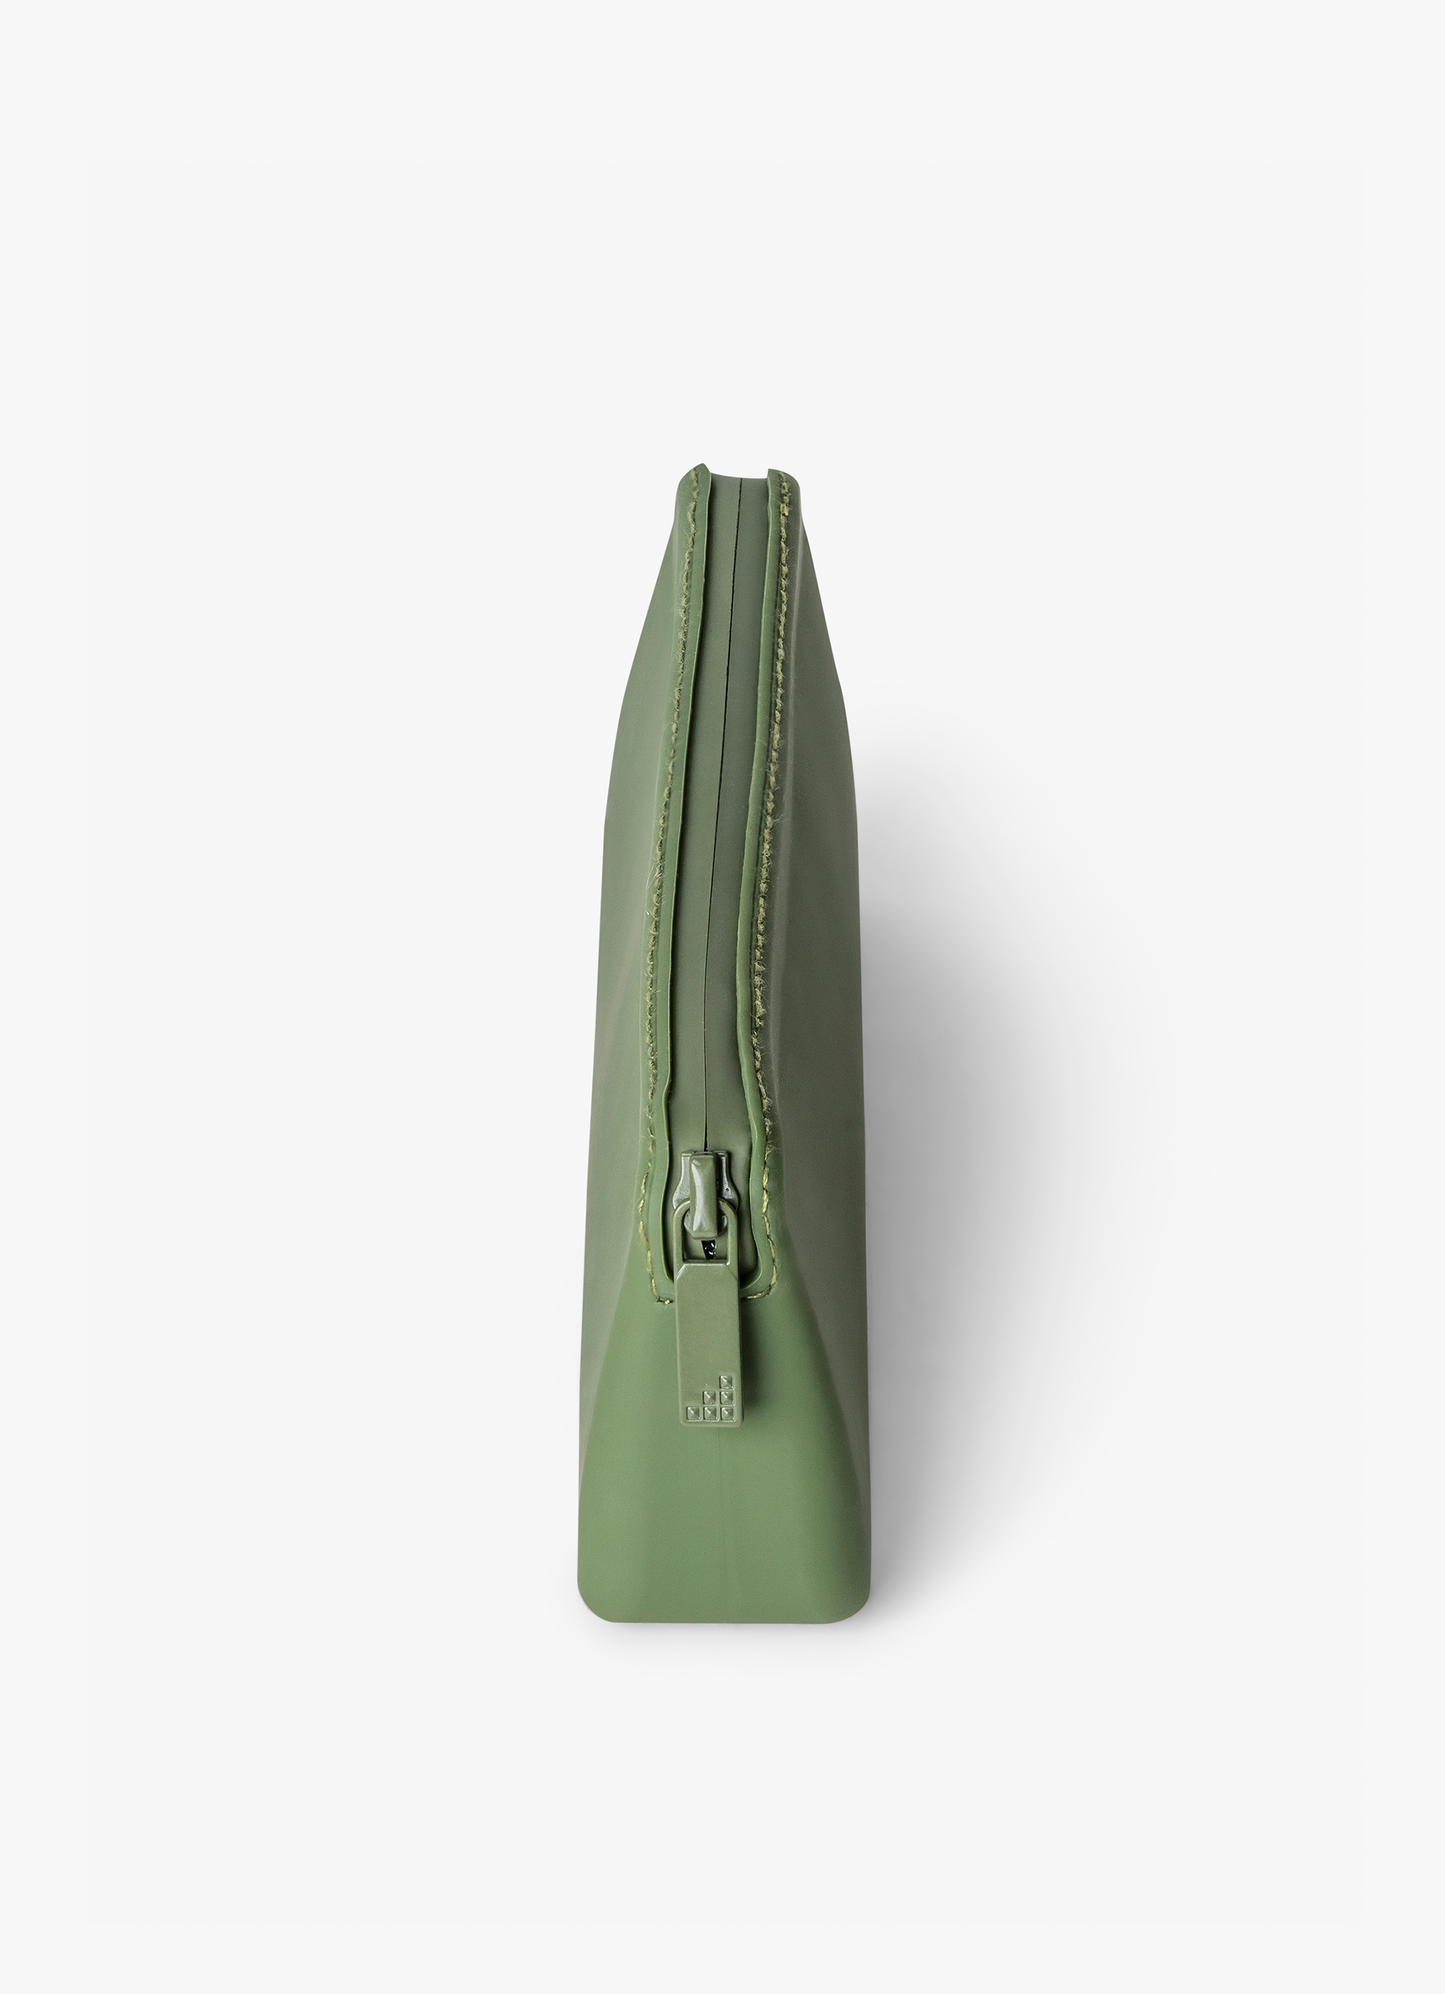 Citron Silicone Cutlery Pouch - Green - Laadlee